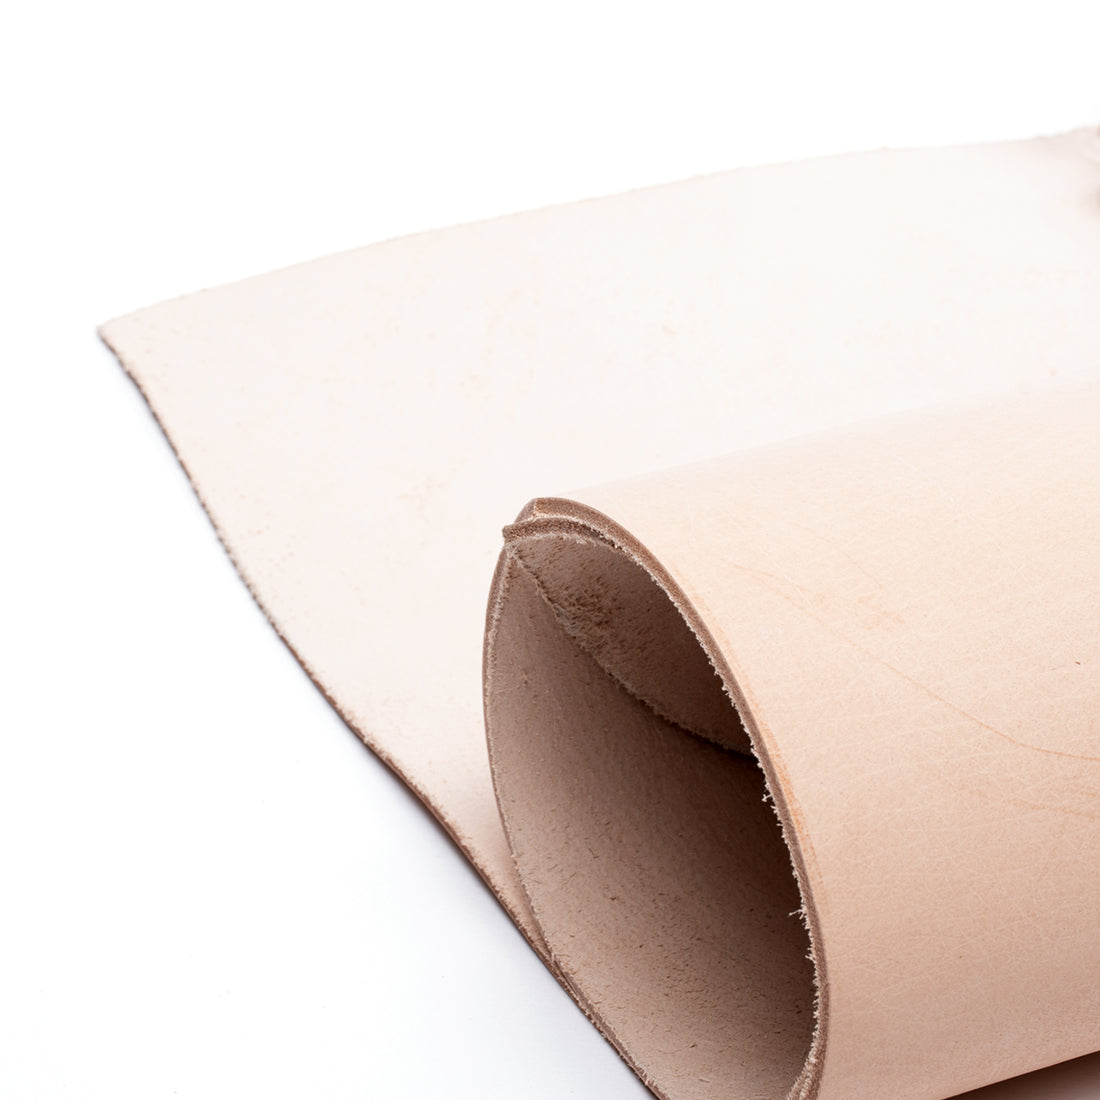 Veg tanned leather sheets - Natural